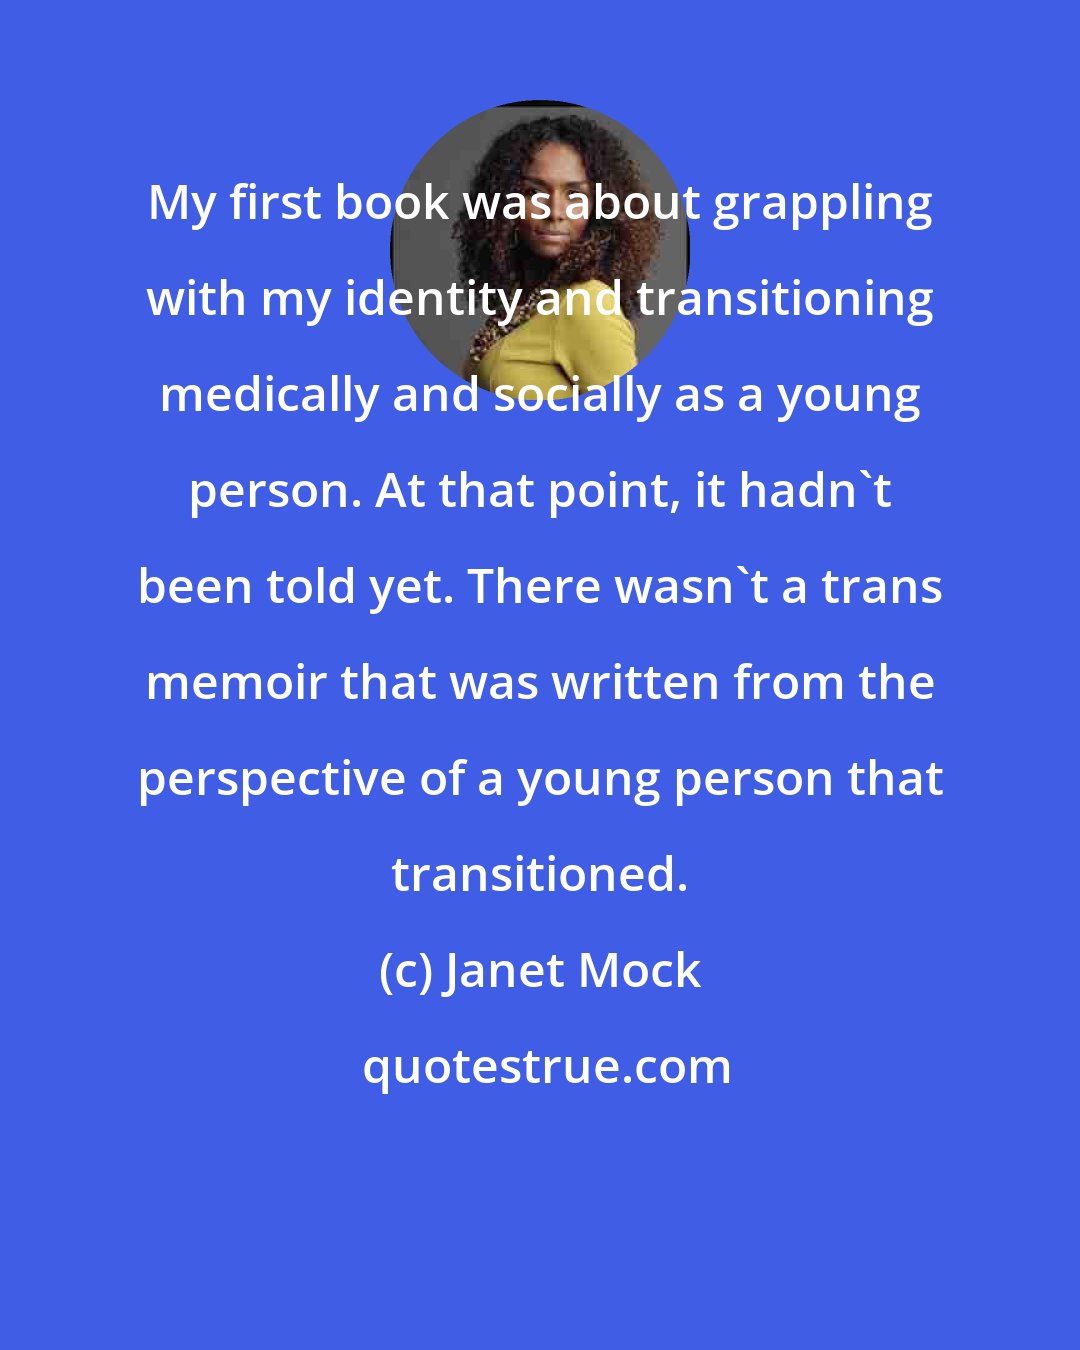 Janet Mock: My first book was about grappling with my identity and transitioning medically and socially as a young person. At that point, it hadn't been told yet. There wasn't a trans memoir that was written from the perspective of a young person that transitioned.